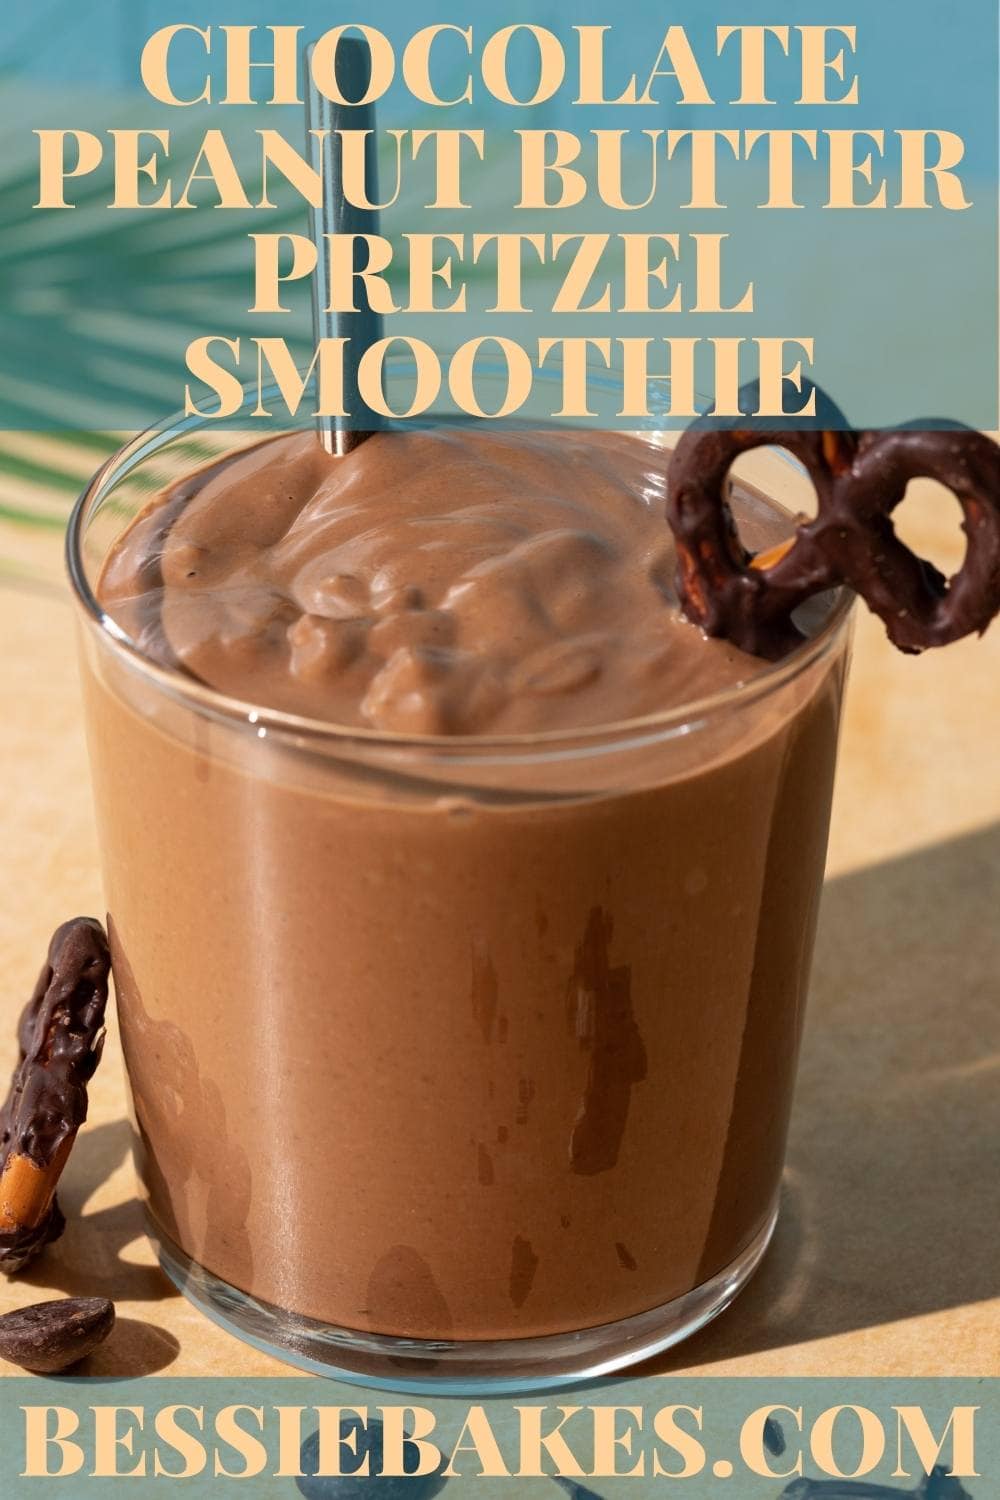 This smoothie is so delightfully savory and sweet that you won’t even notice that it’s not loaded with all the sugar of a peanut butter cup. For smoothie lovers that want a chocolate smoothie without banana, this one is sure to be a winner. via @bessiebakes